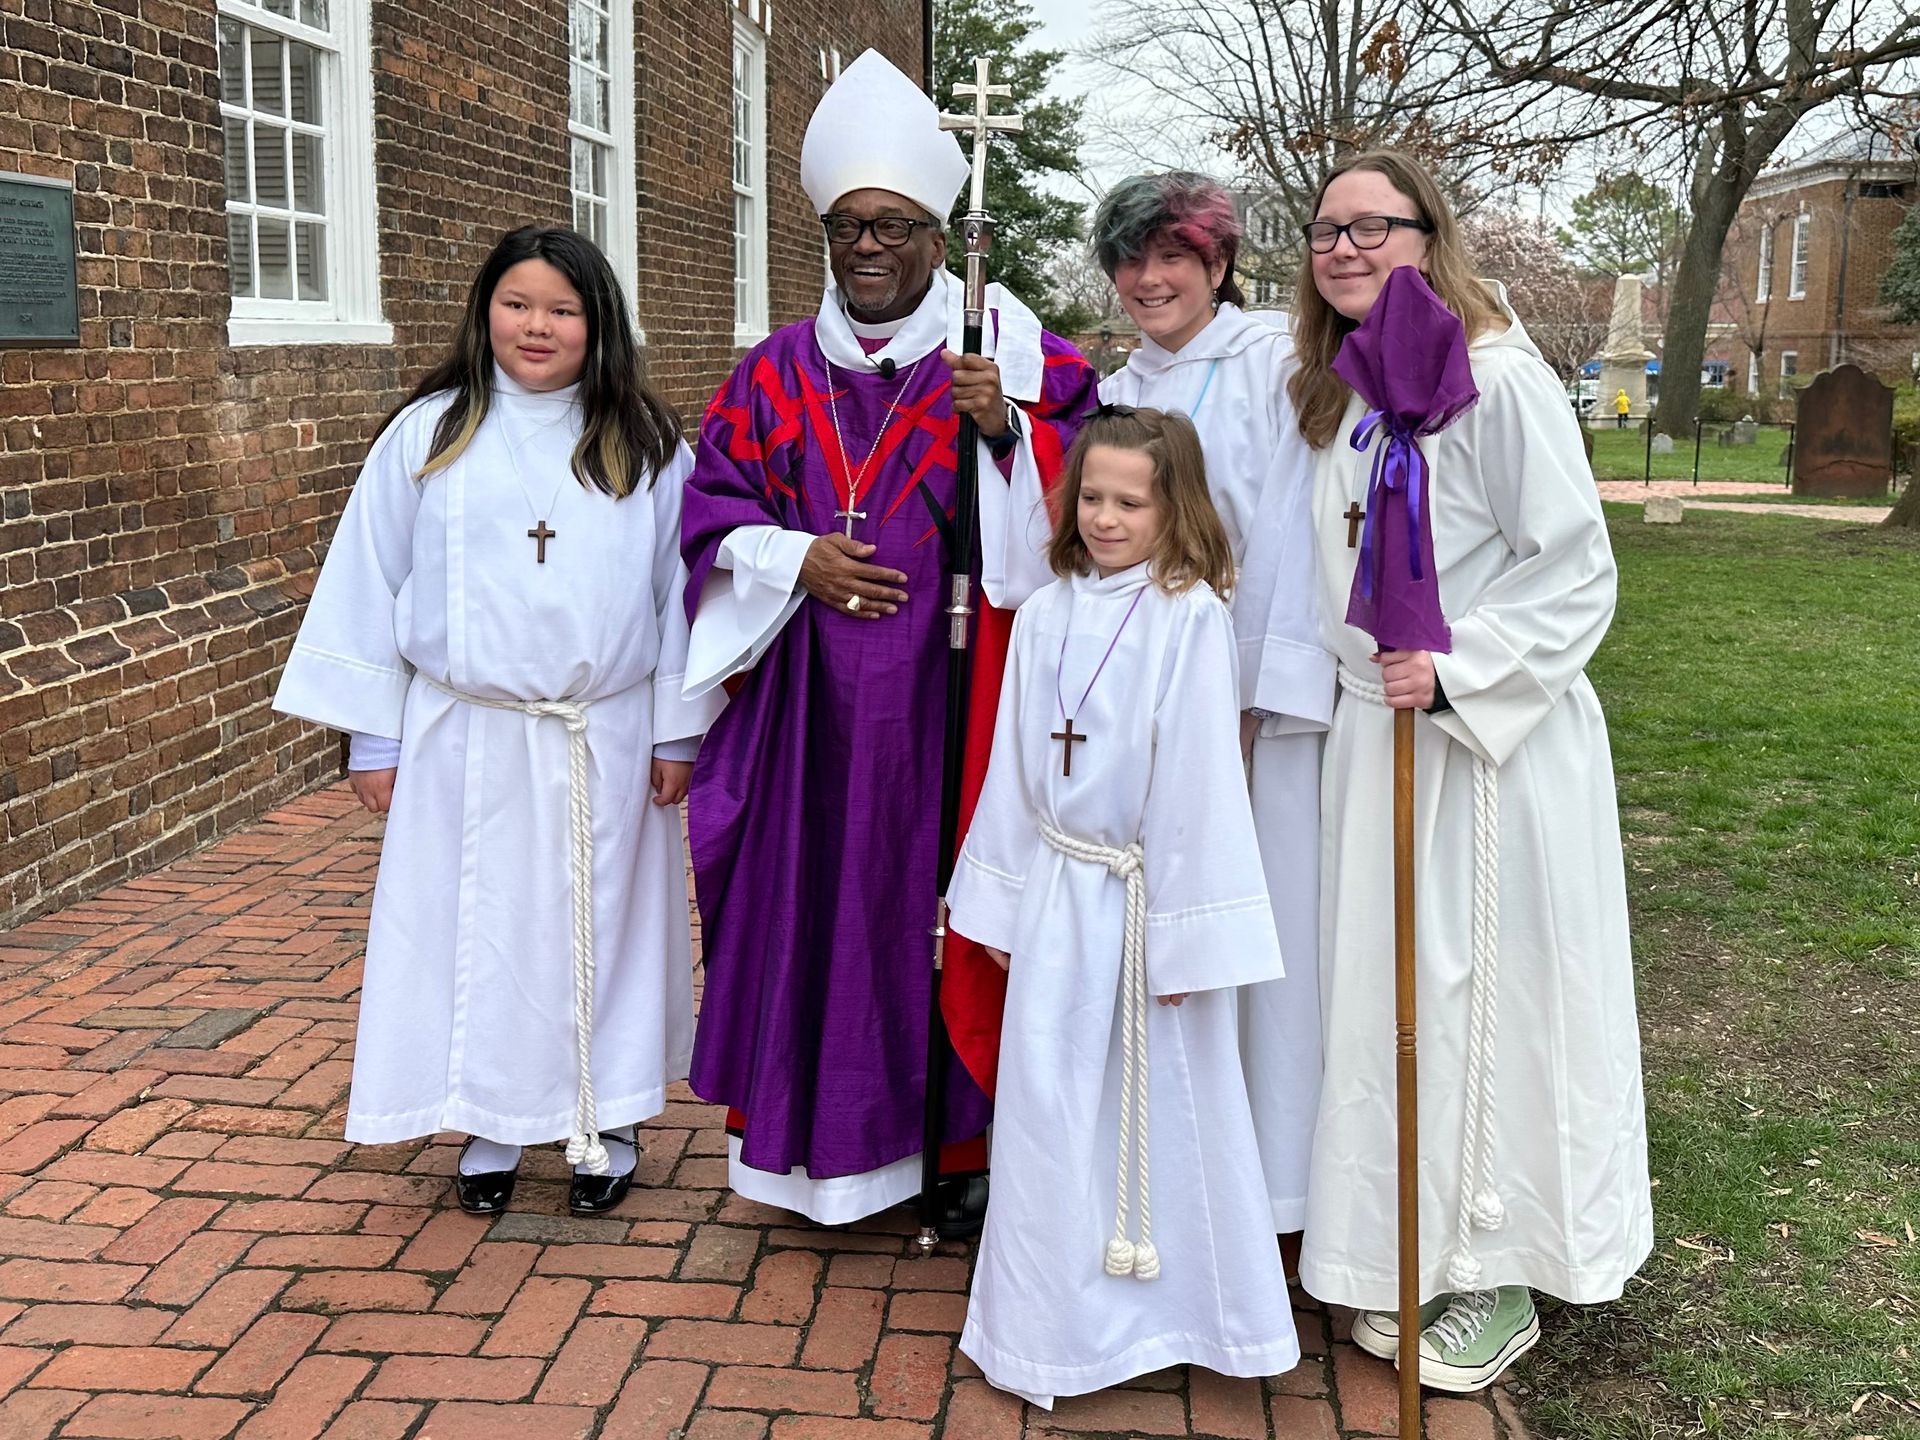 Youth Acolytes for Presiding Bishop Curry's visit